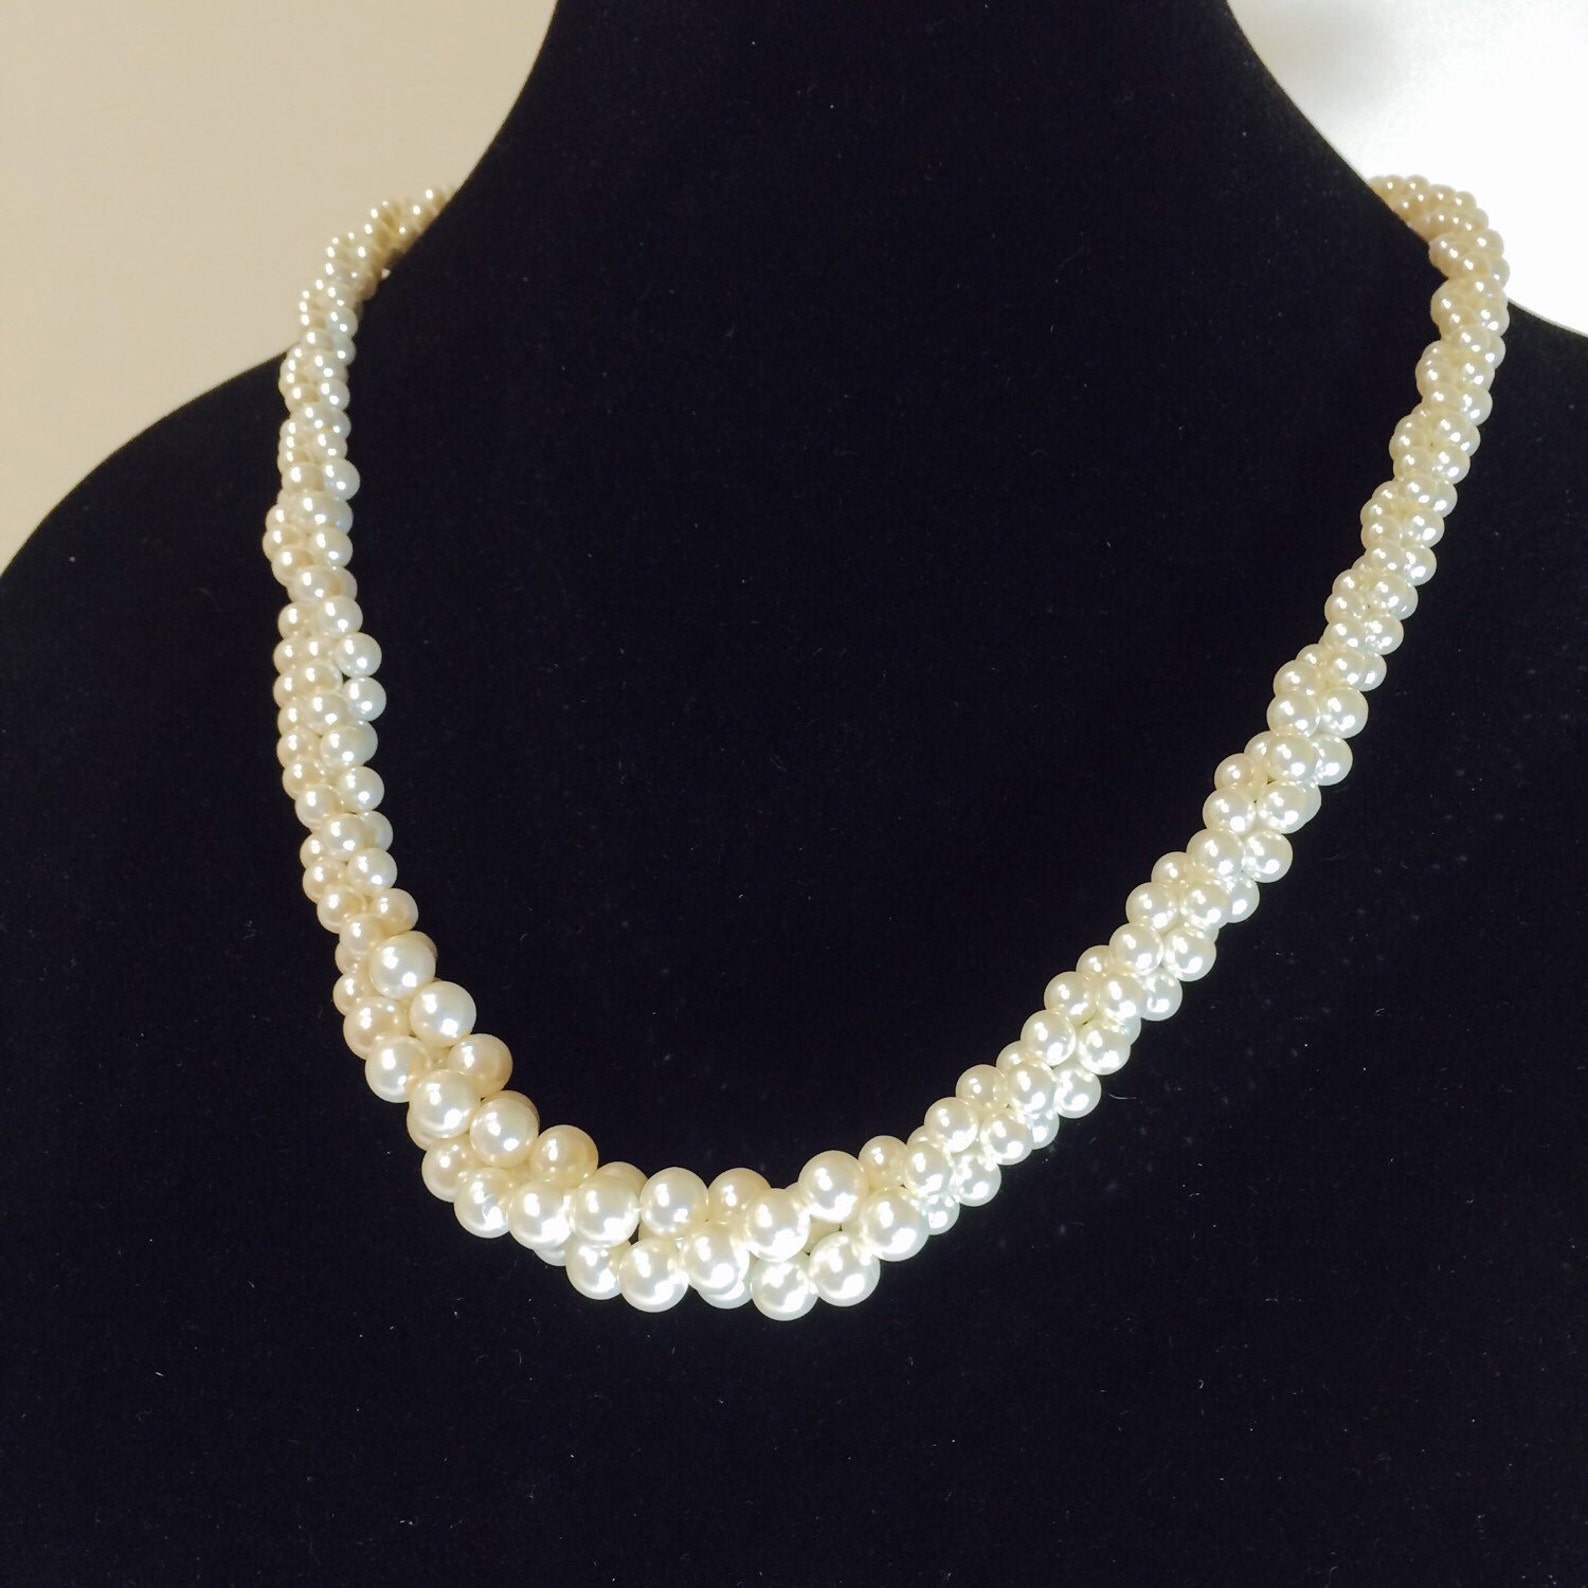 Vintage Long White Pearl Necklace 3 Twisted Strands of Classic - Etsy